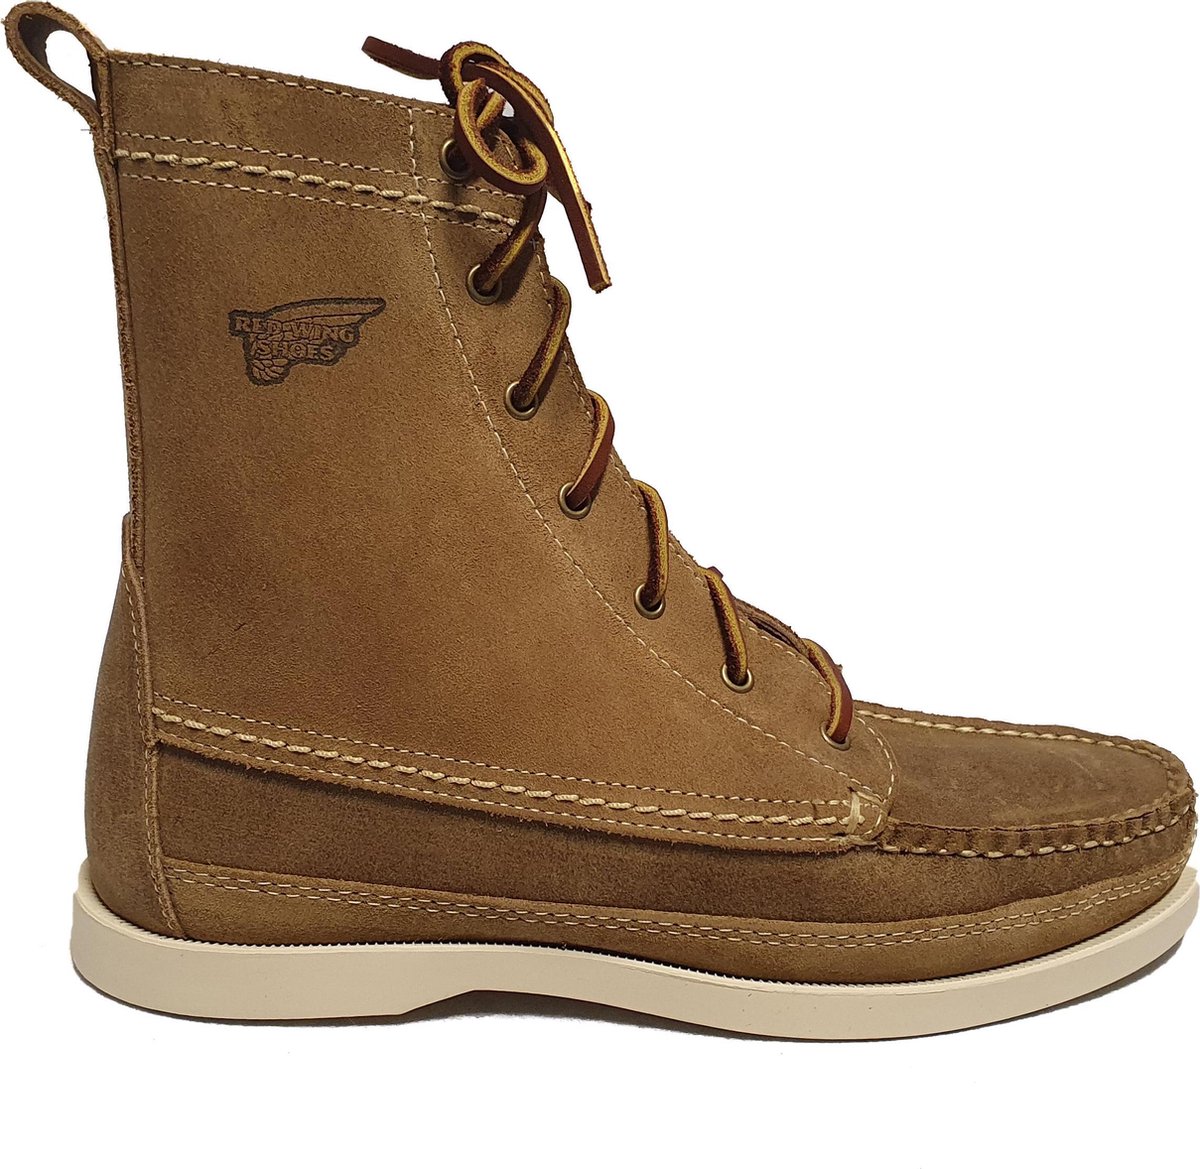 Red Wing Wabasha Boat Boot Suede 07190 Camel EU 40